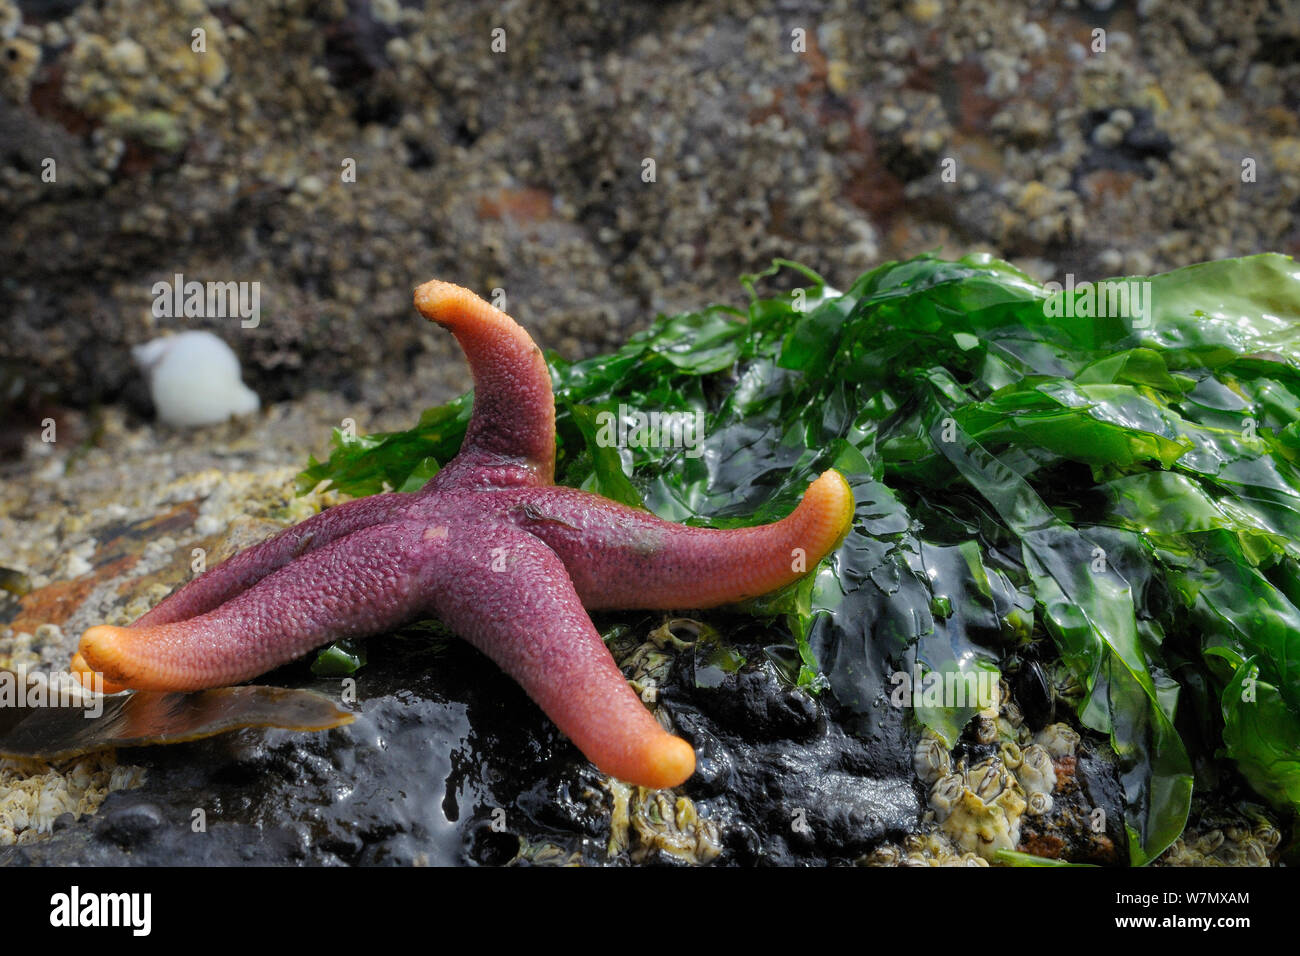 Bloody Henry starfish (Henricia oculata) exposed on a low spring tide on rocks next to a clump of Sea lettuce (Ulva lactuca) Crail, Scotland, UK, July Stock Photo